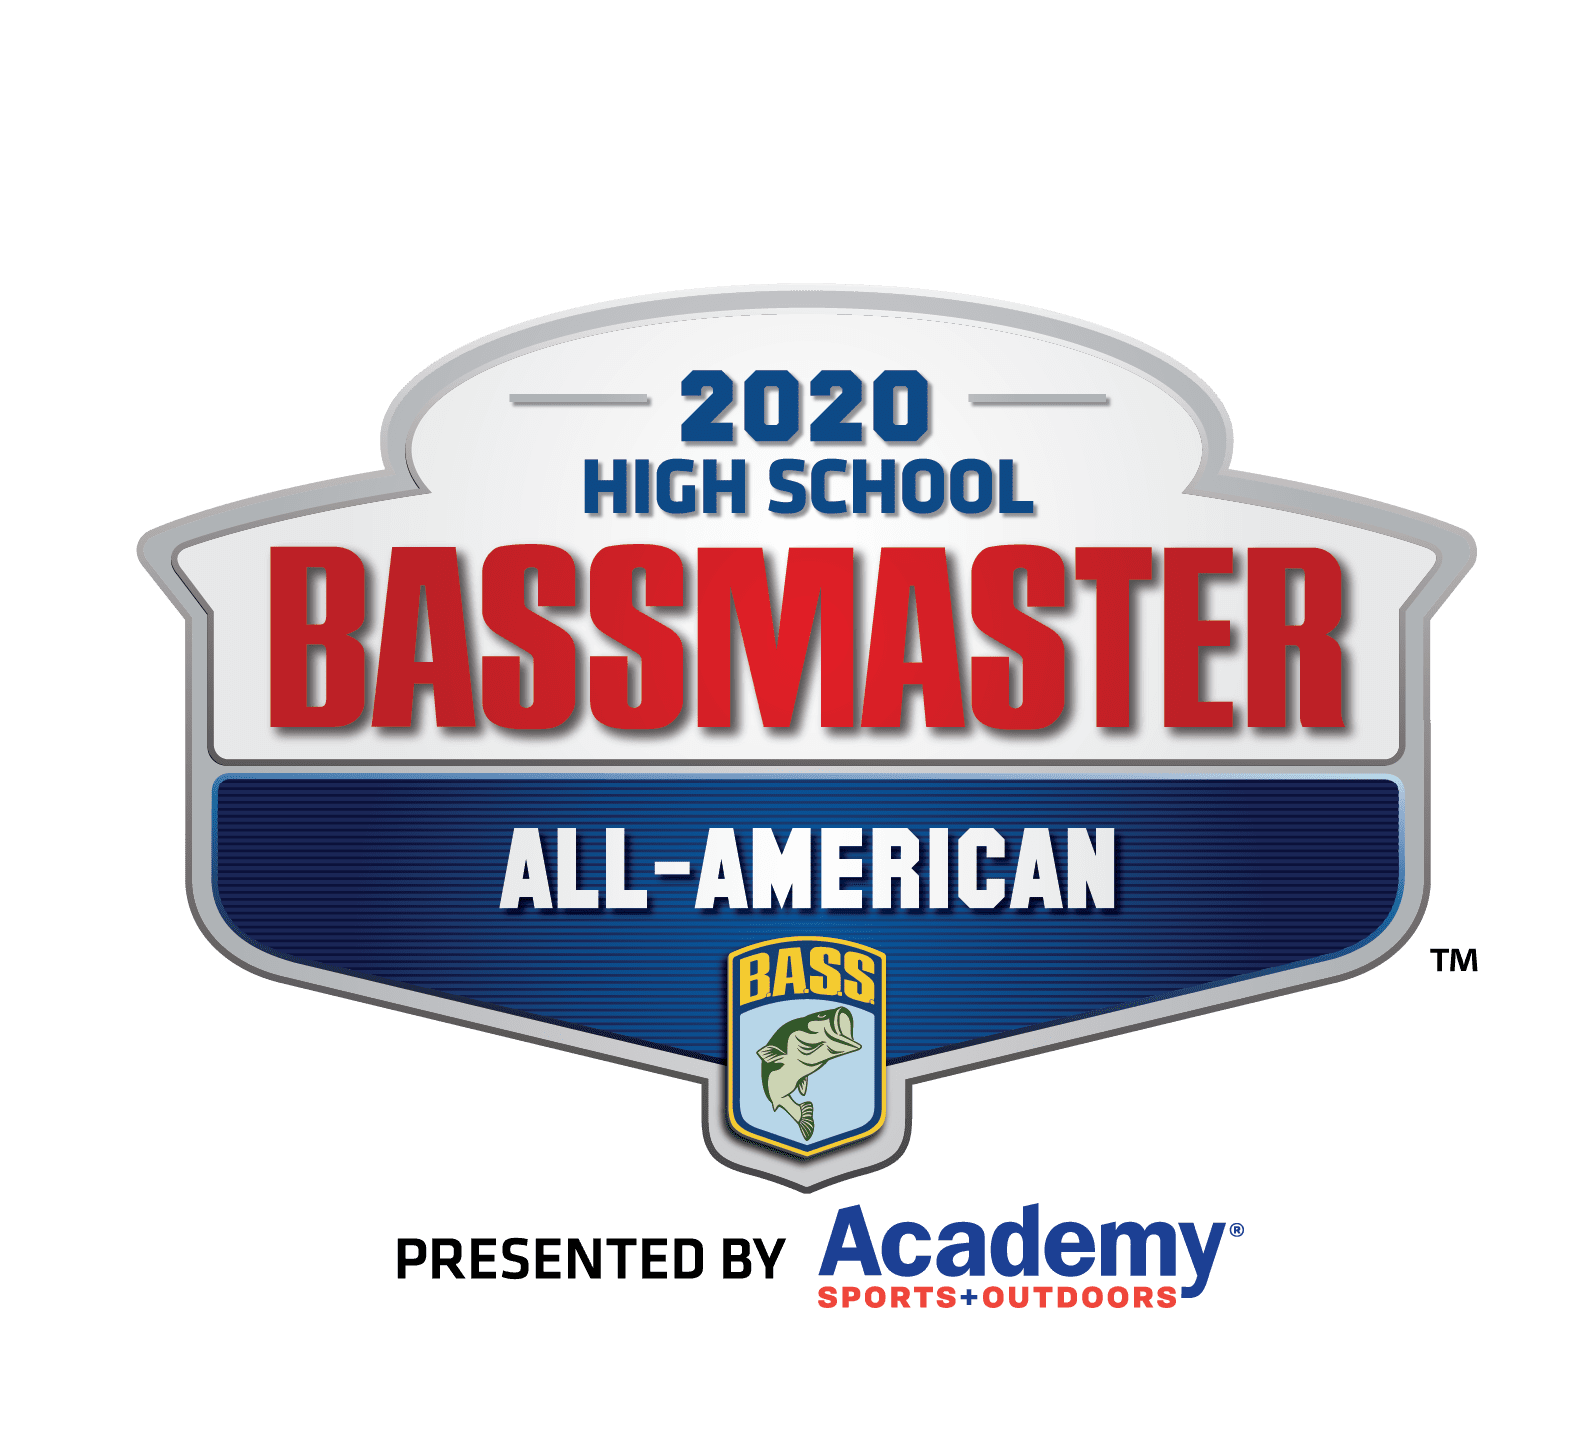 Nominations Now Open For 2020 Class Of Bassmaster High School All-Americans